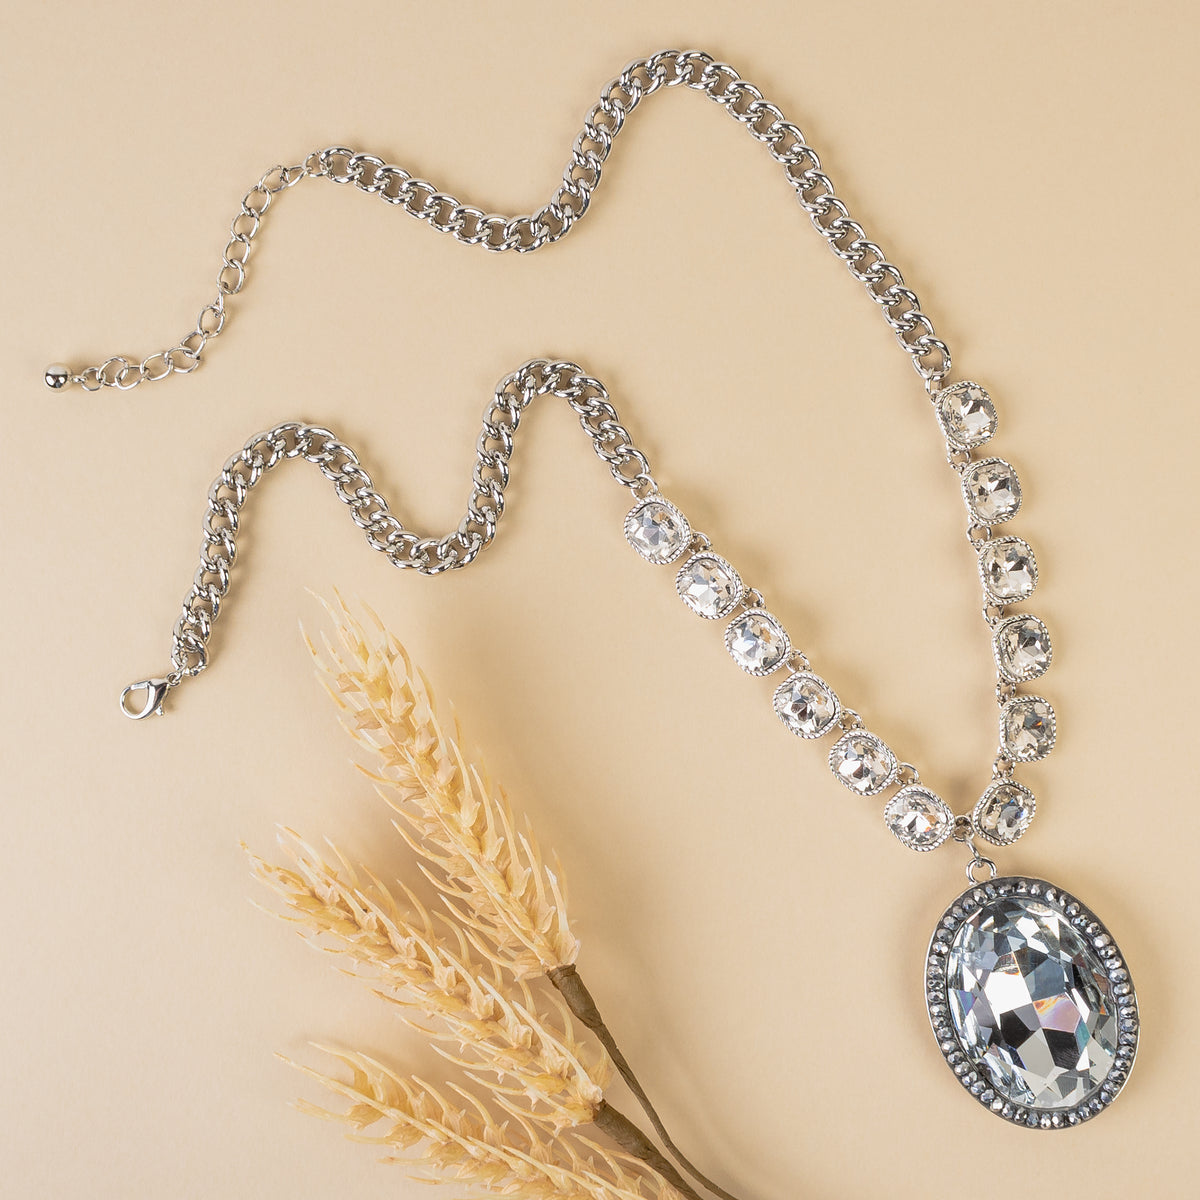 1161 - Crystal Necklace - Silver & White